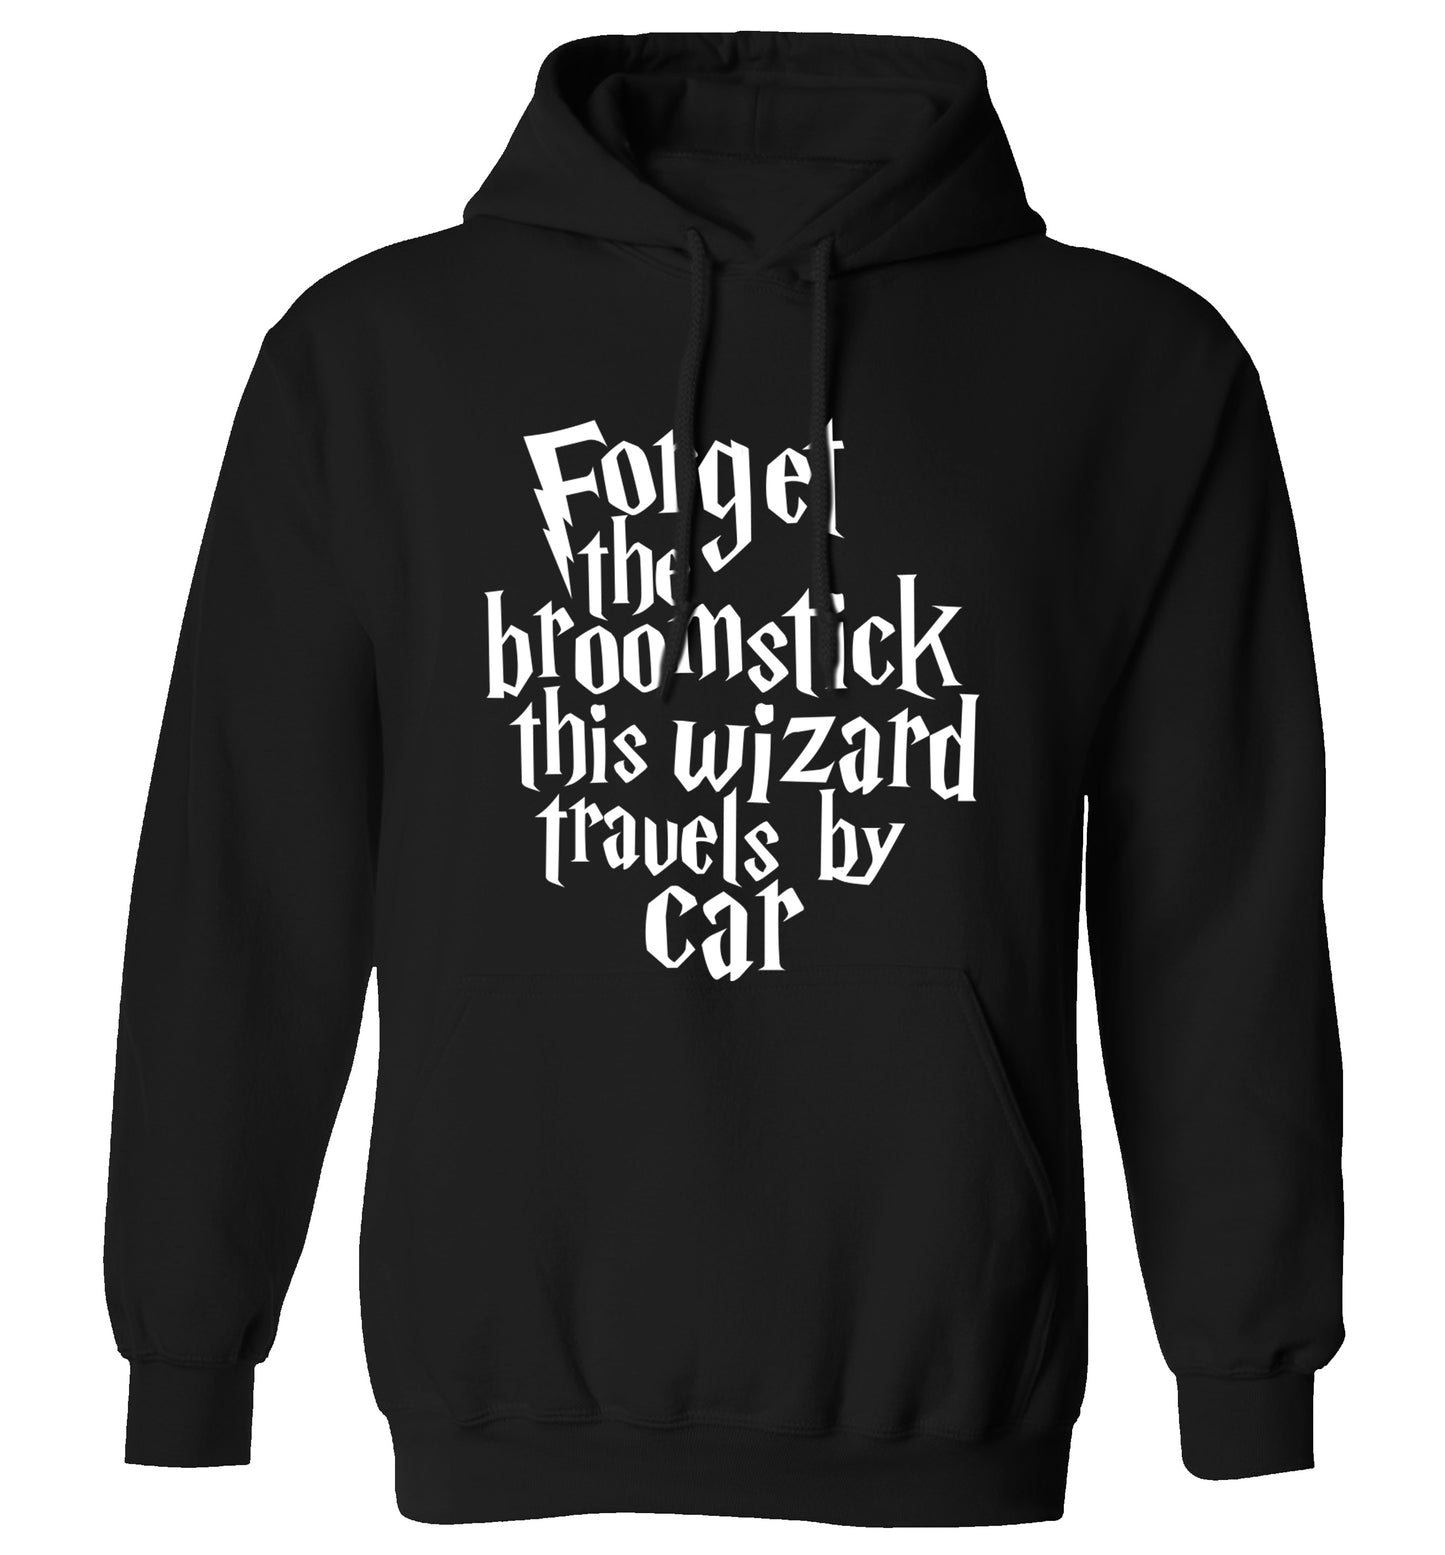 Forget the broomstick this wizard travels by car adults unisexblack hoodie 2XL